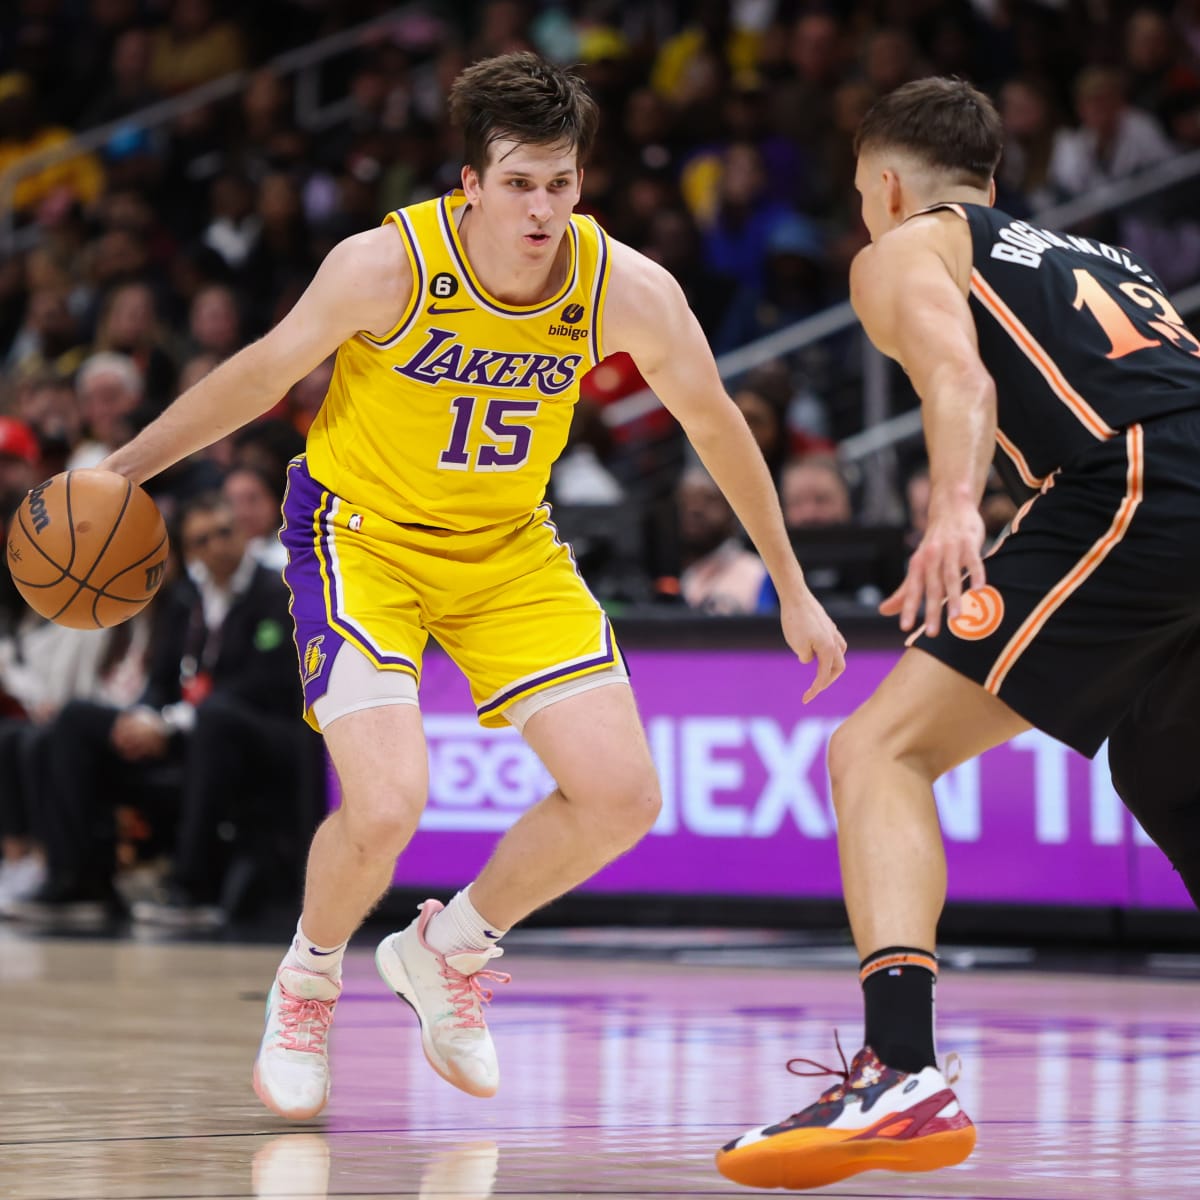 All Lakers Experts Predict Free Agent Market For Austin Reaves - All Lakers | News, Rumors, Videos, Schedule, Roster, Salaries And More